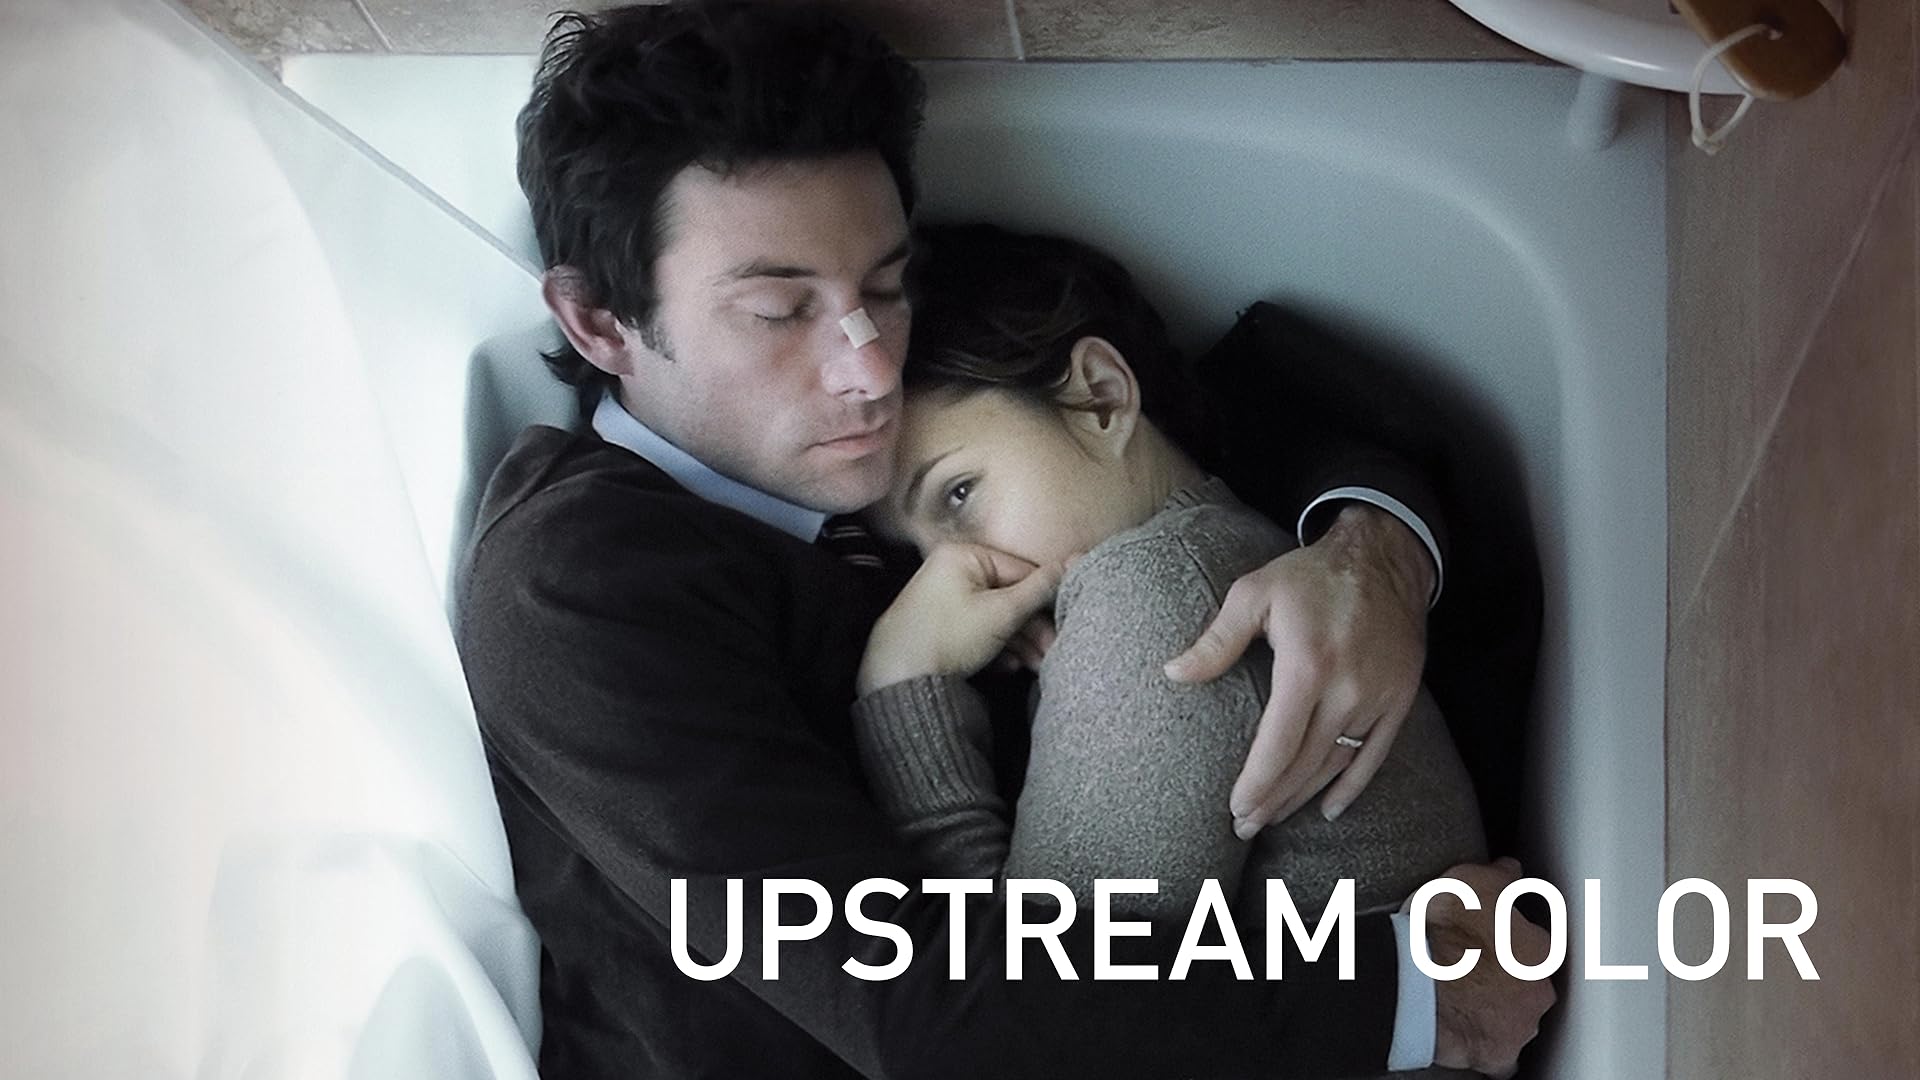 35-facts-about-the-movie-upstream-color